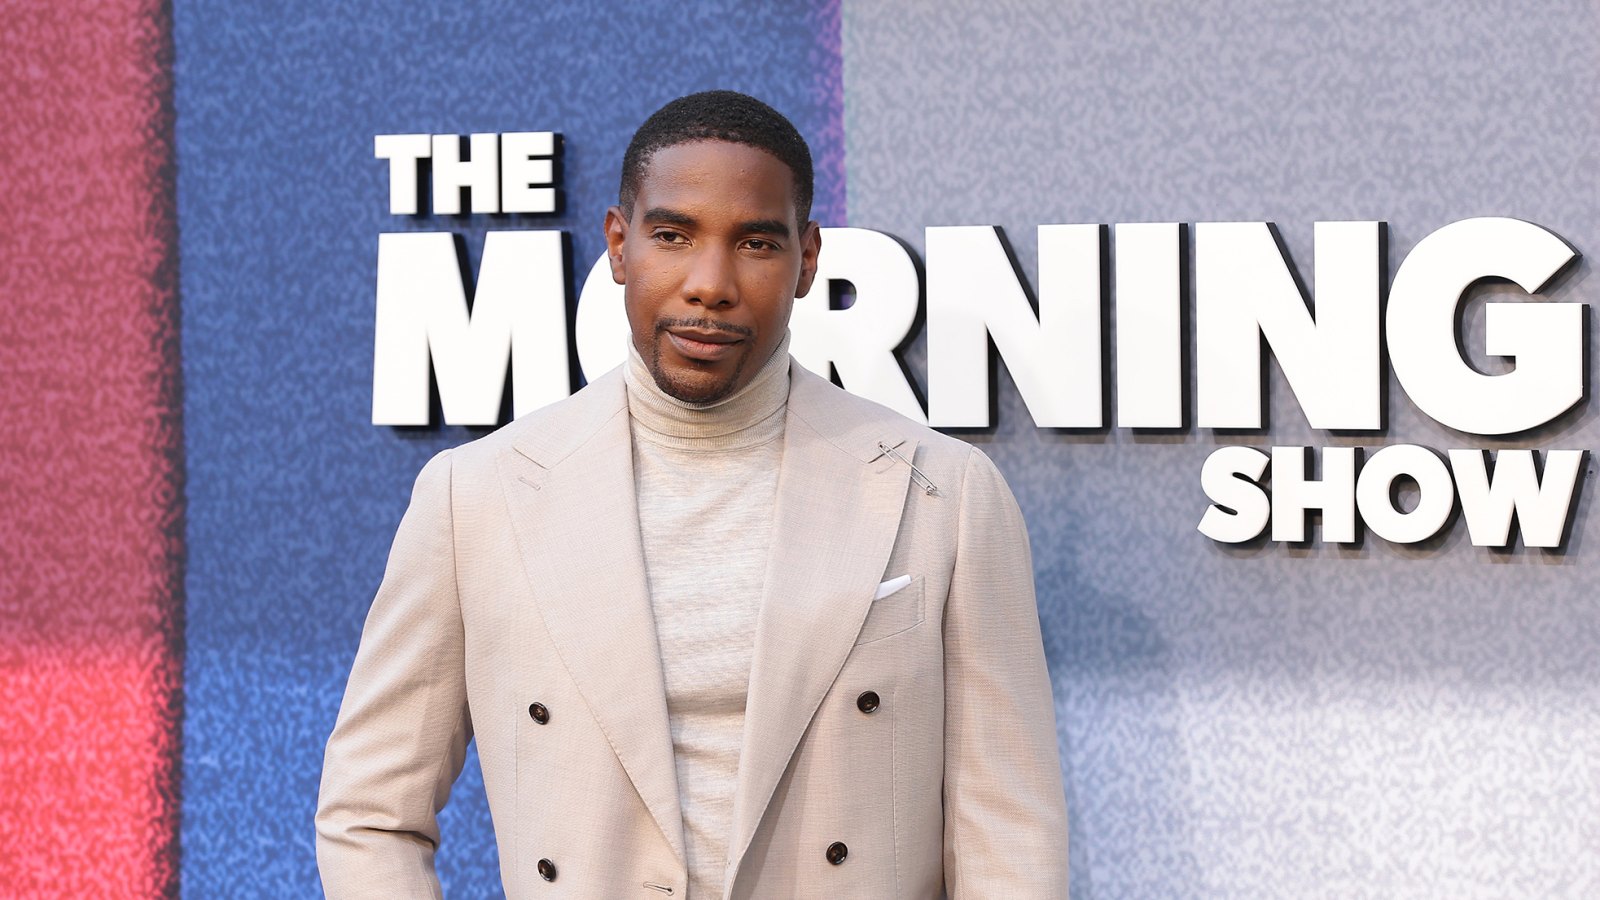 ‘The Morning Show’ Star Desean Terry Addresses Not Being Asked Back for Season 3: ‘I’m Disappointed’